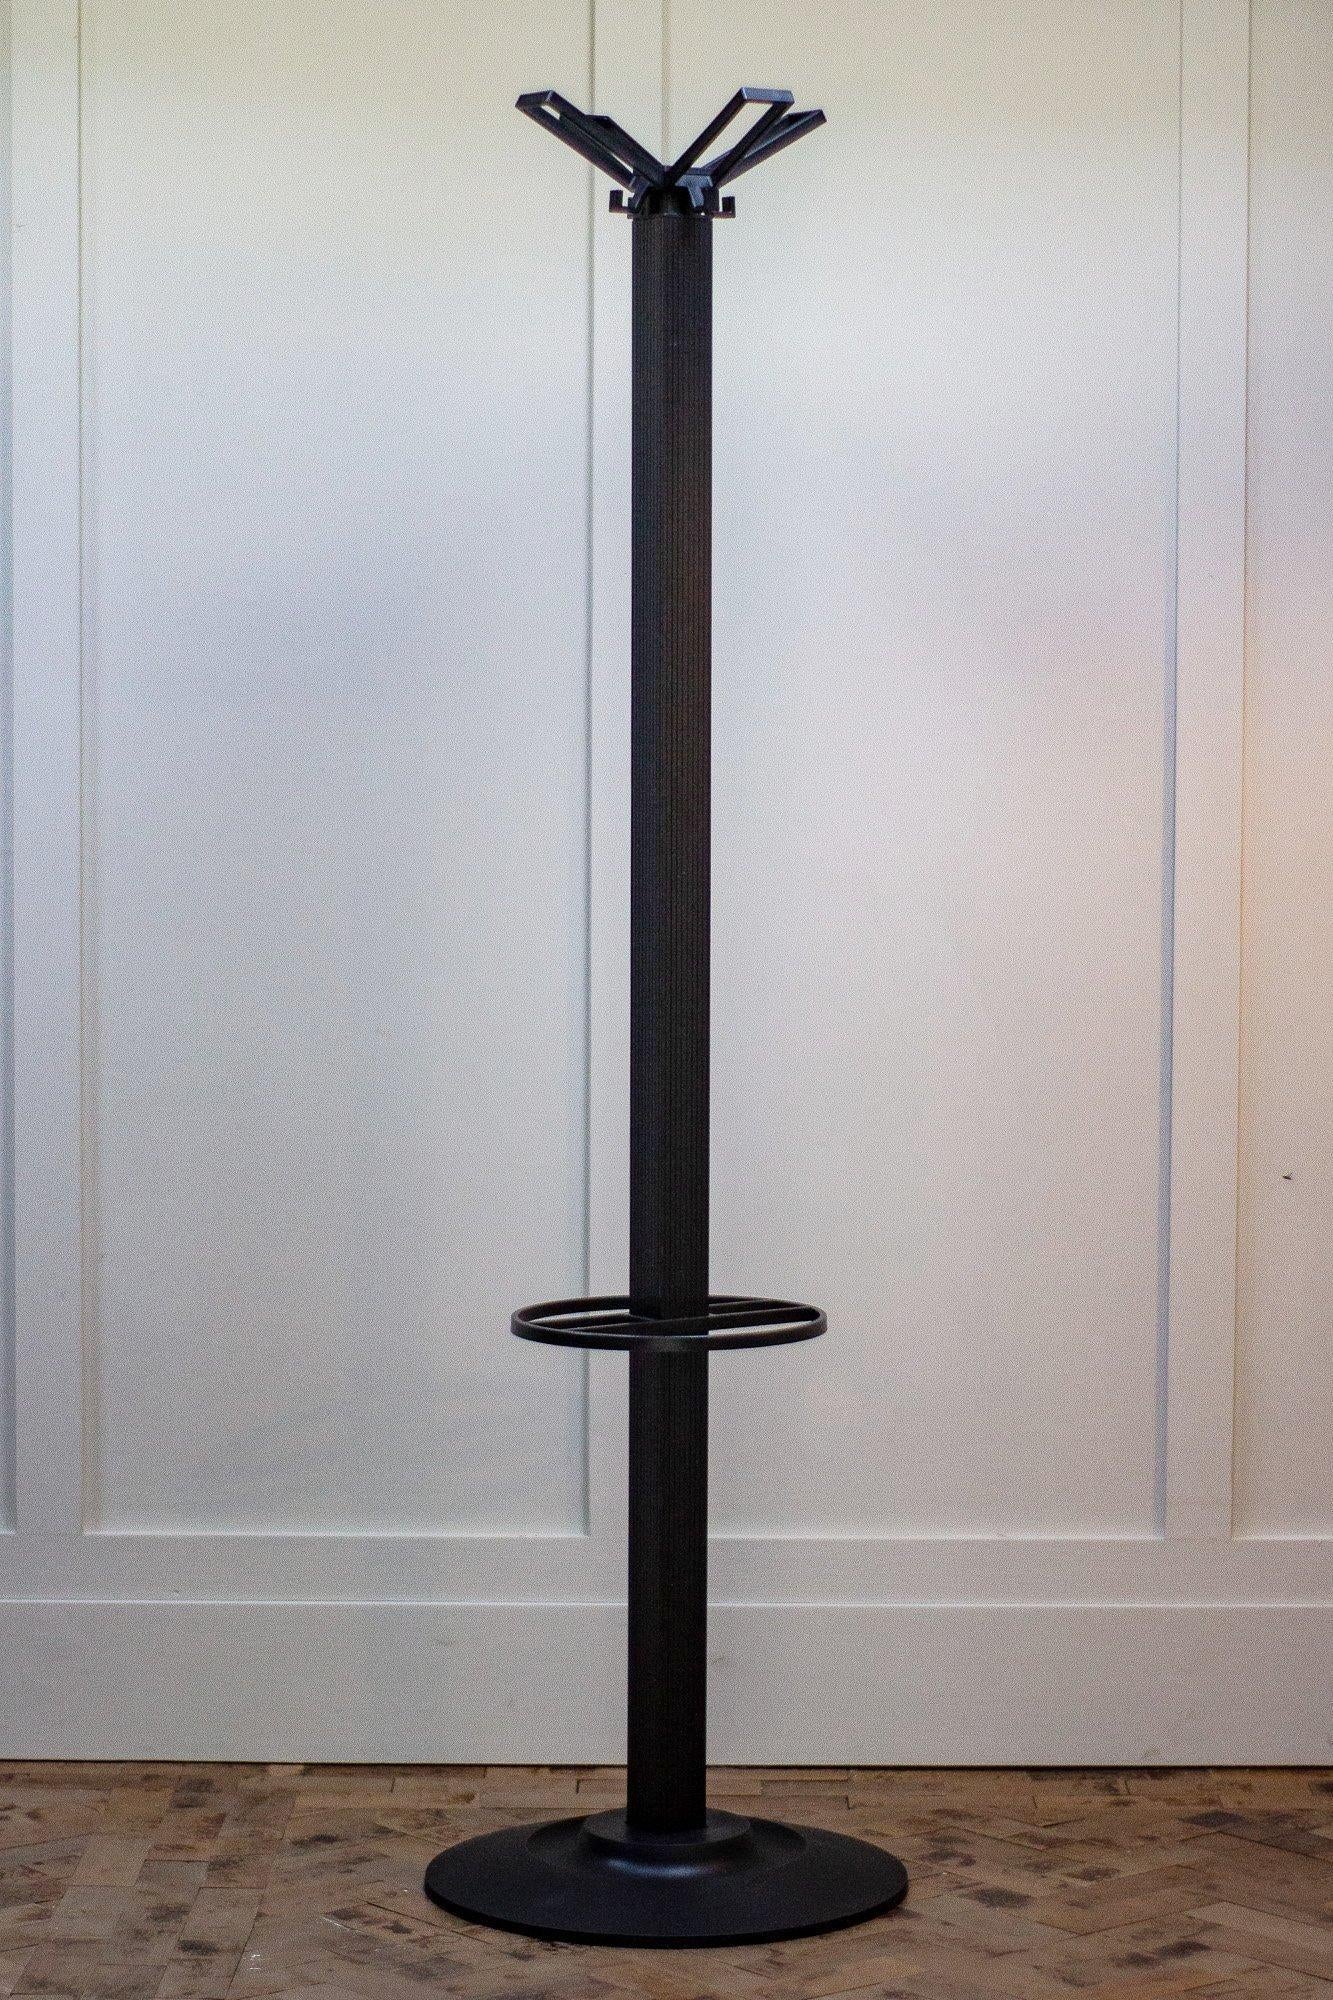 Italian coat stand by Kartell. Made of black plastic in the late 1980s. A real standout piece of 1980s design.

Measures: Height 170cm

Depth 46cm

Width 46cm.